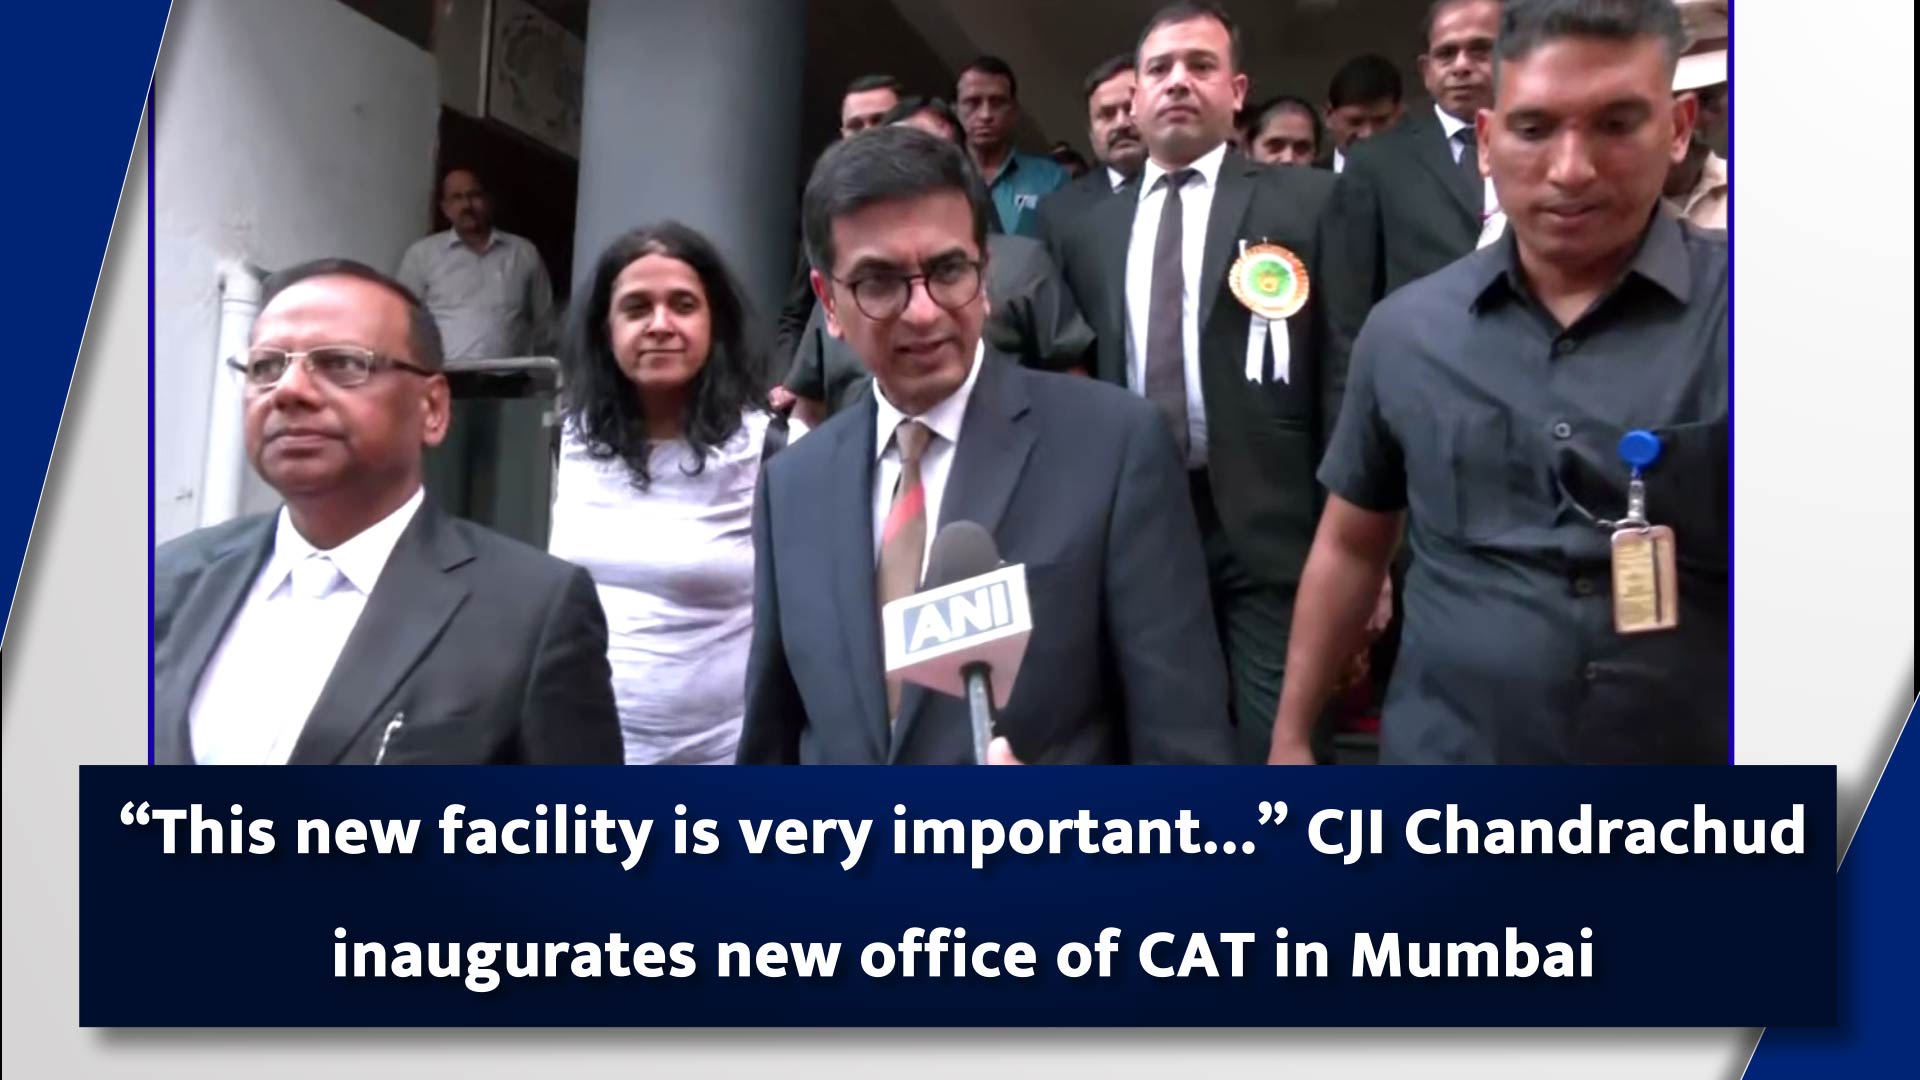 ``This new facility is very important ``CJI Chandrachud inaugurates new office of CAT in Mumbai